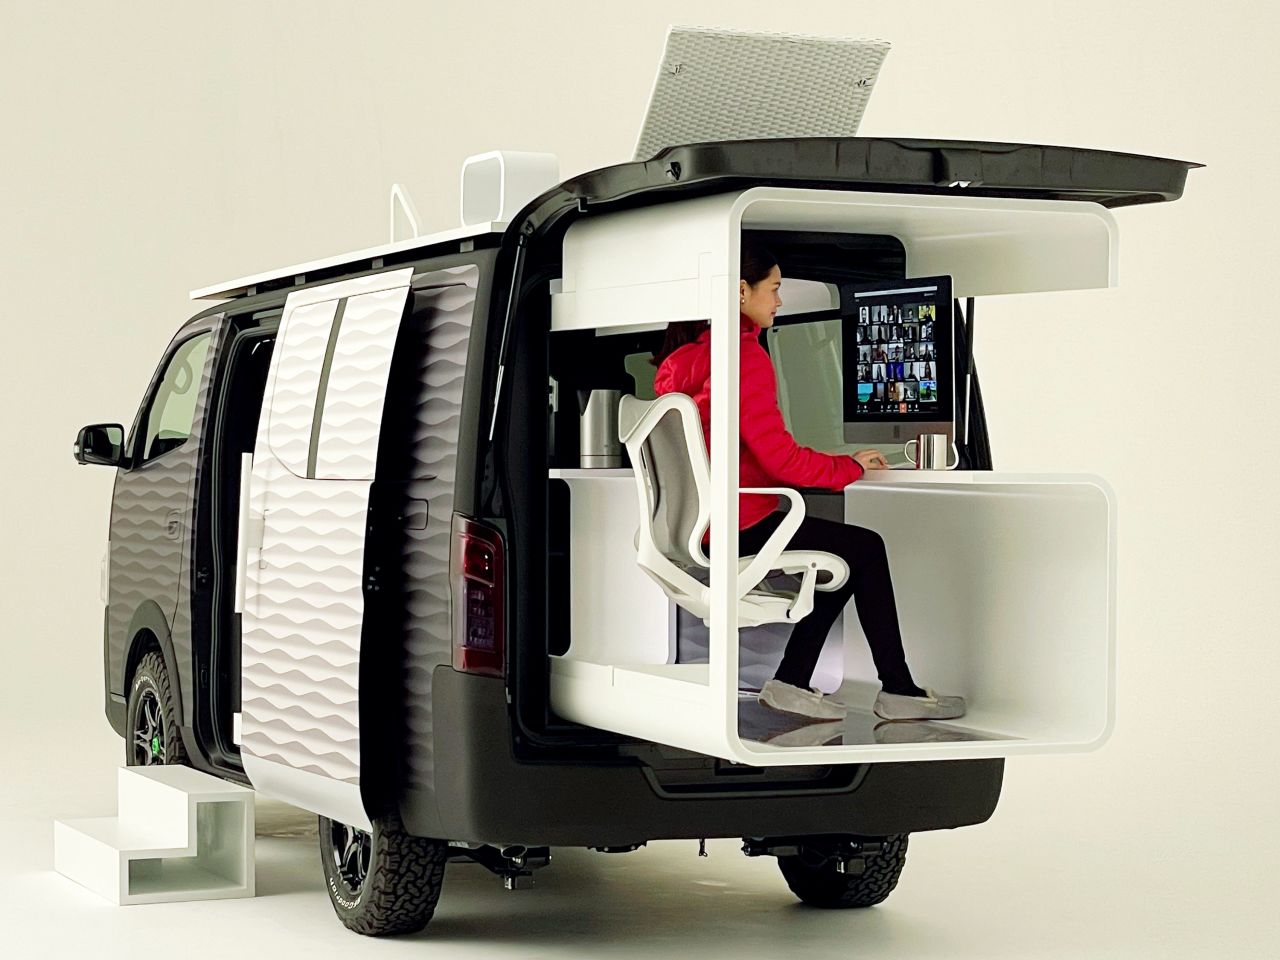 Nissan's new concept camper van, which turns into a home office for remote working.